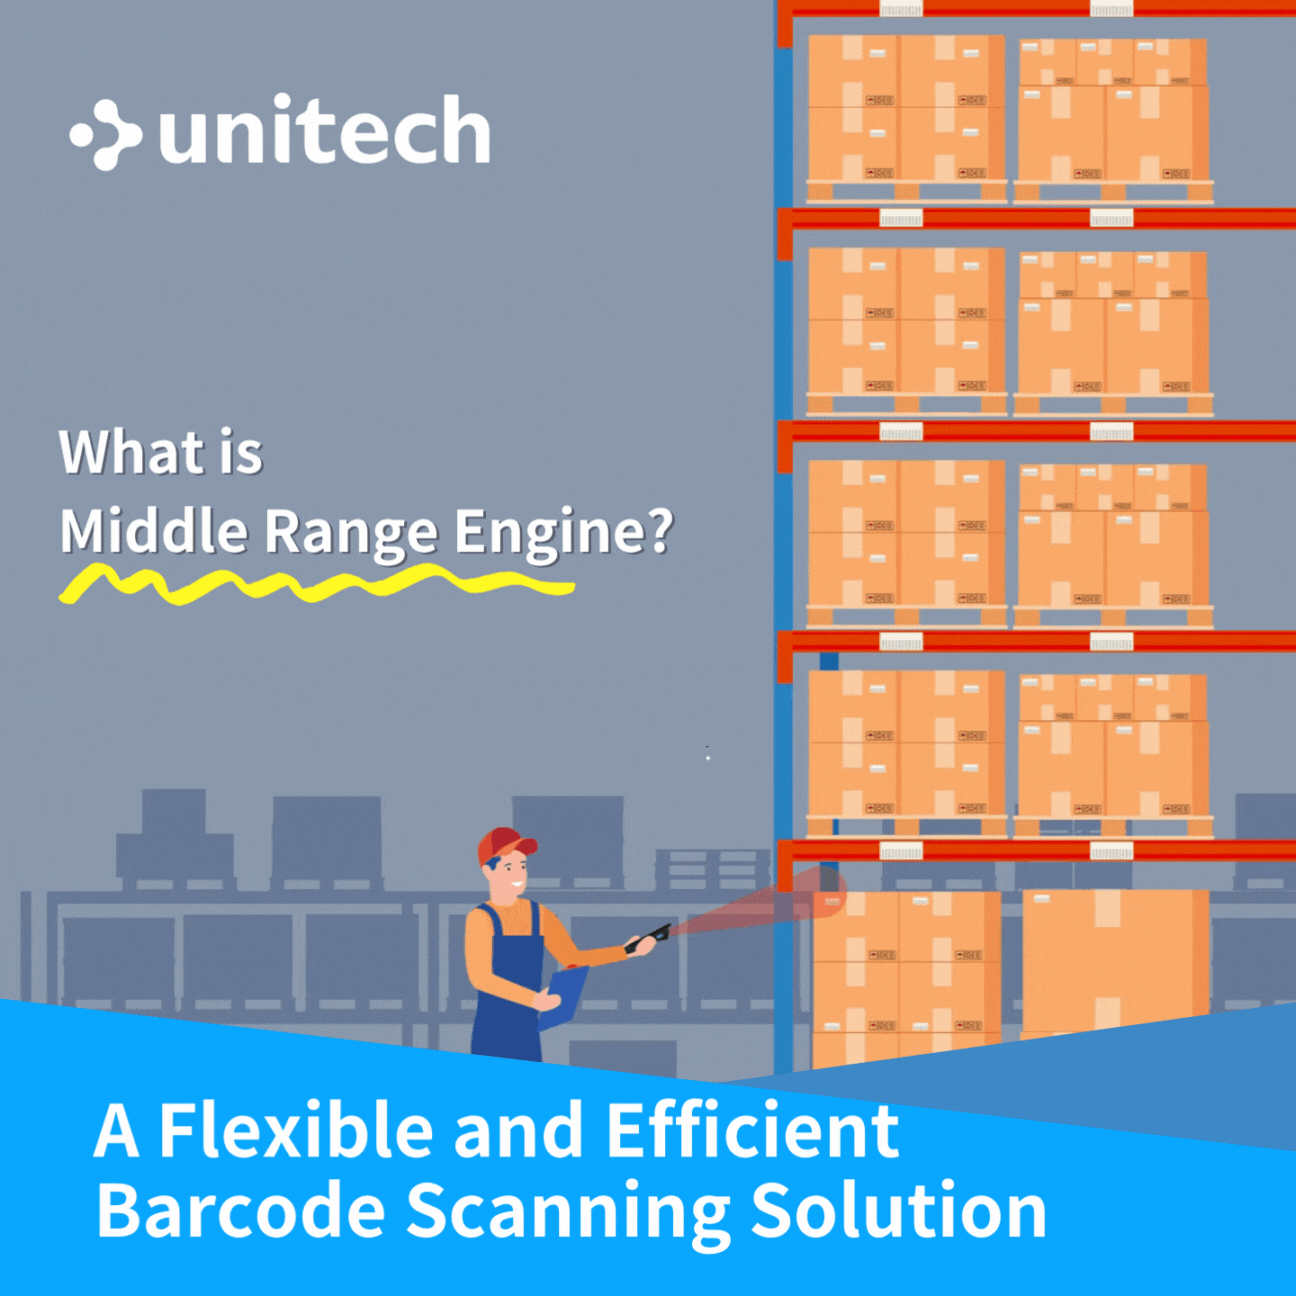 Flexible Barcode Scanning for Warehouse, Manufacturing Environments